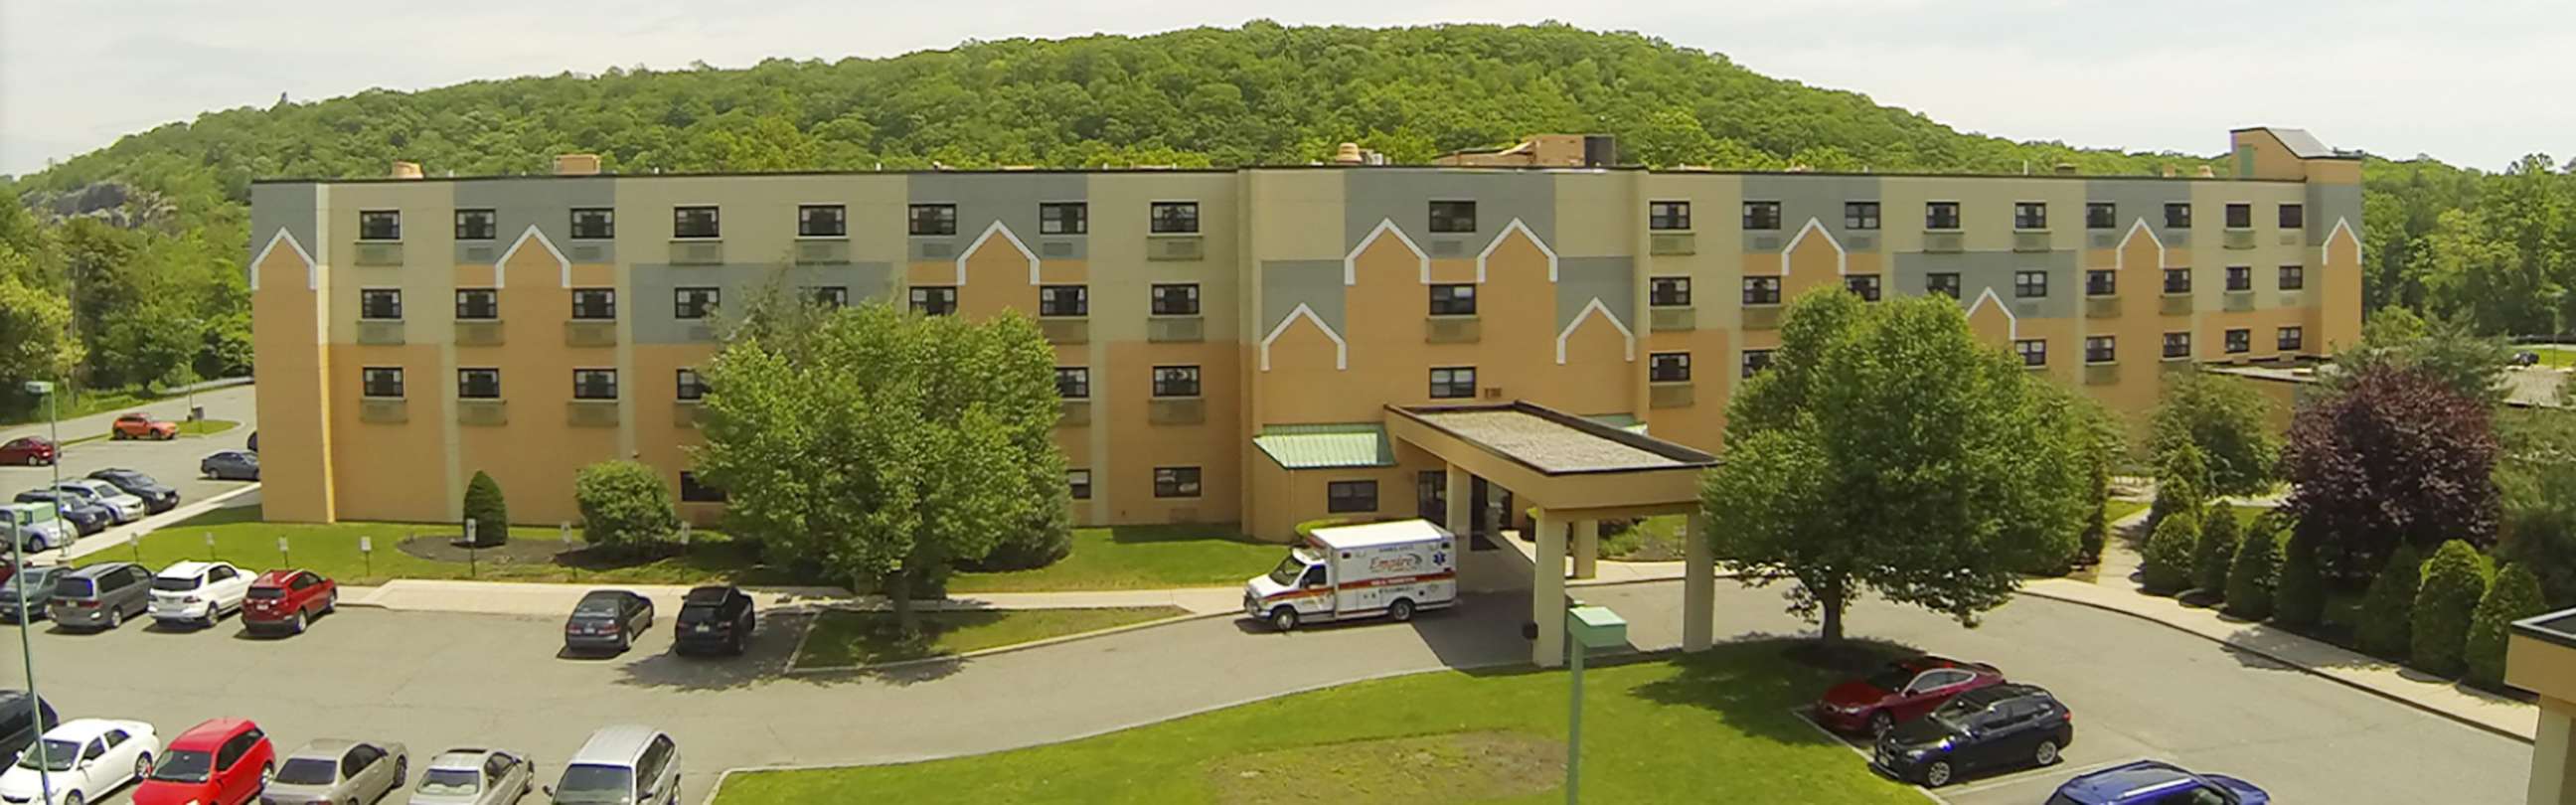 PHOTO: Wanaque Center for Nursing and Rehabilitation in Haskell, N.J, is pictured in this undated image from Google.